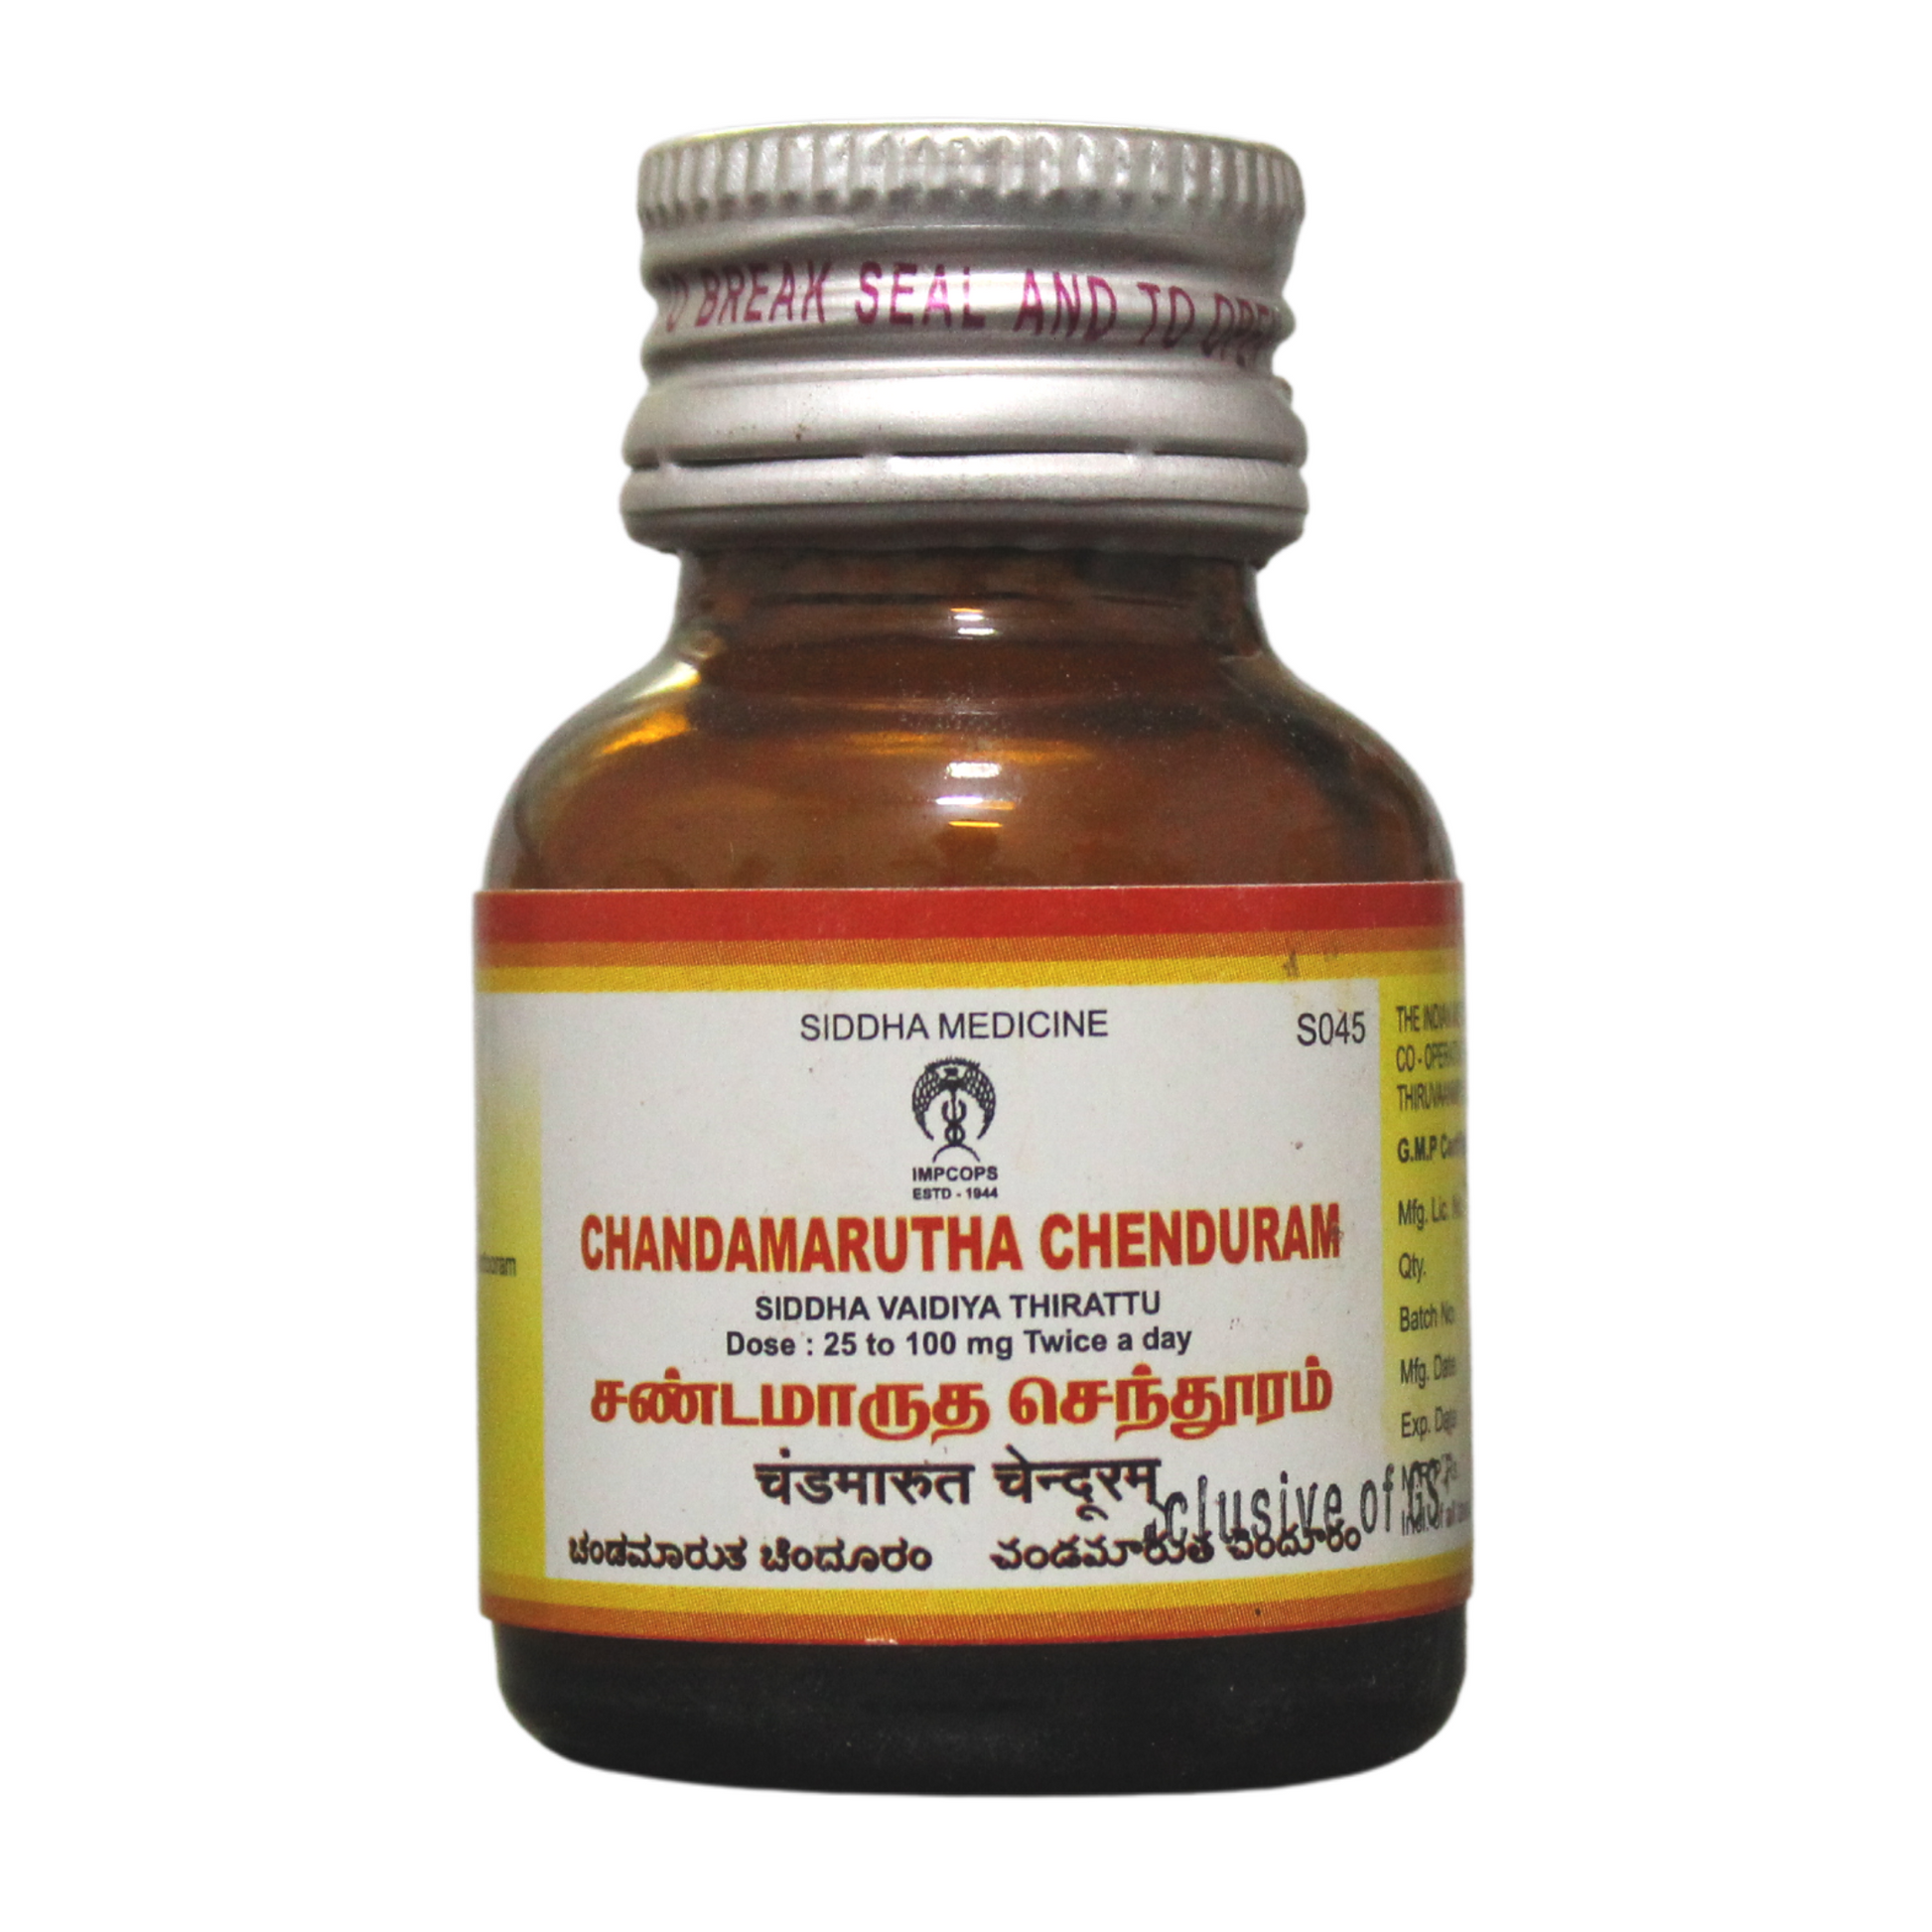 Shop Impcops Chandamarutha Chendooram 2gm at price 49.00 from Impcops Online - Ayush Care